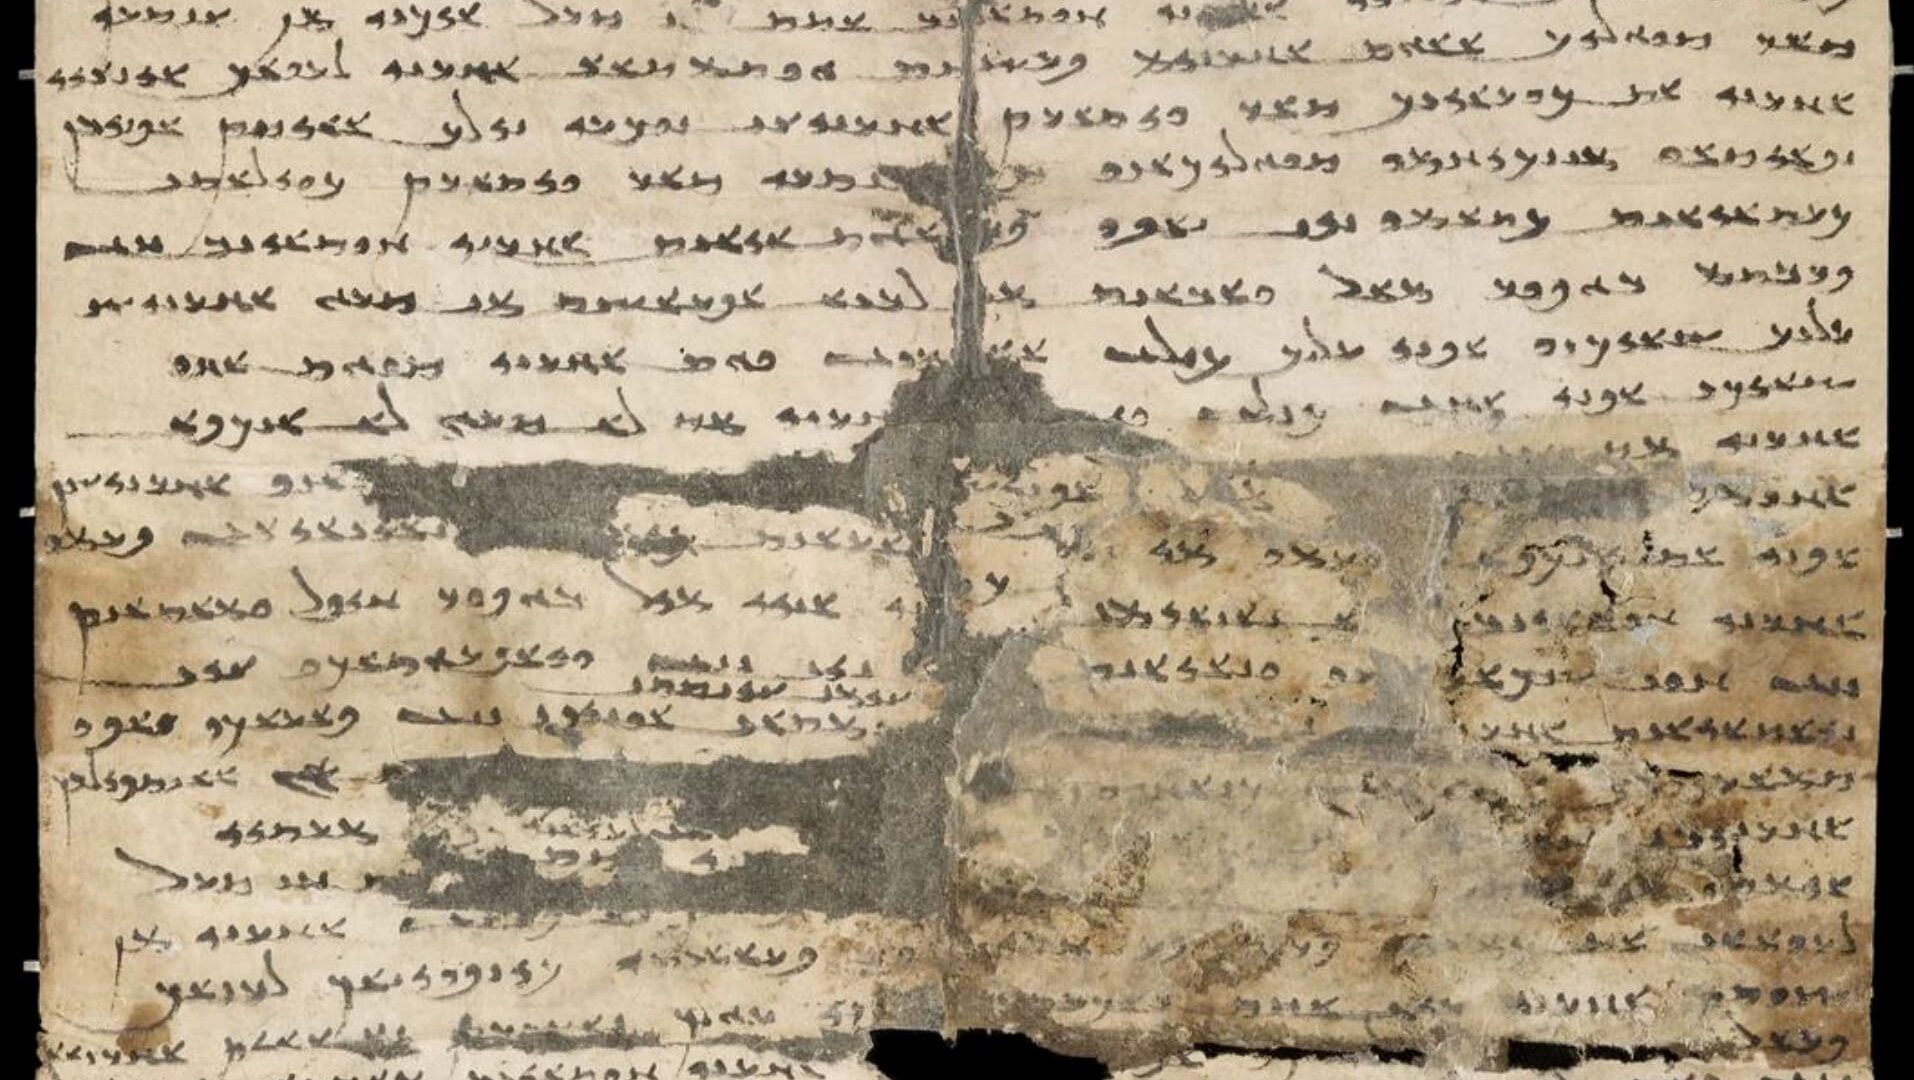 Sogdian Ancient Letter 2 from Nanai-vandak to the noble lord Varzakk in Samarkand concerning news in China.